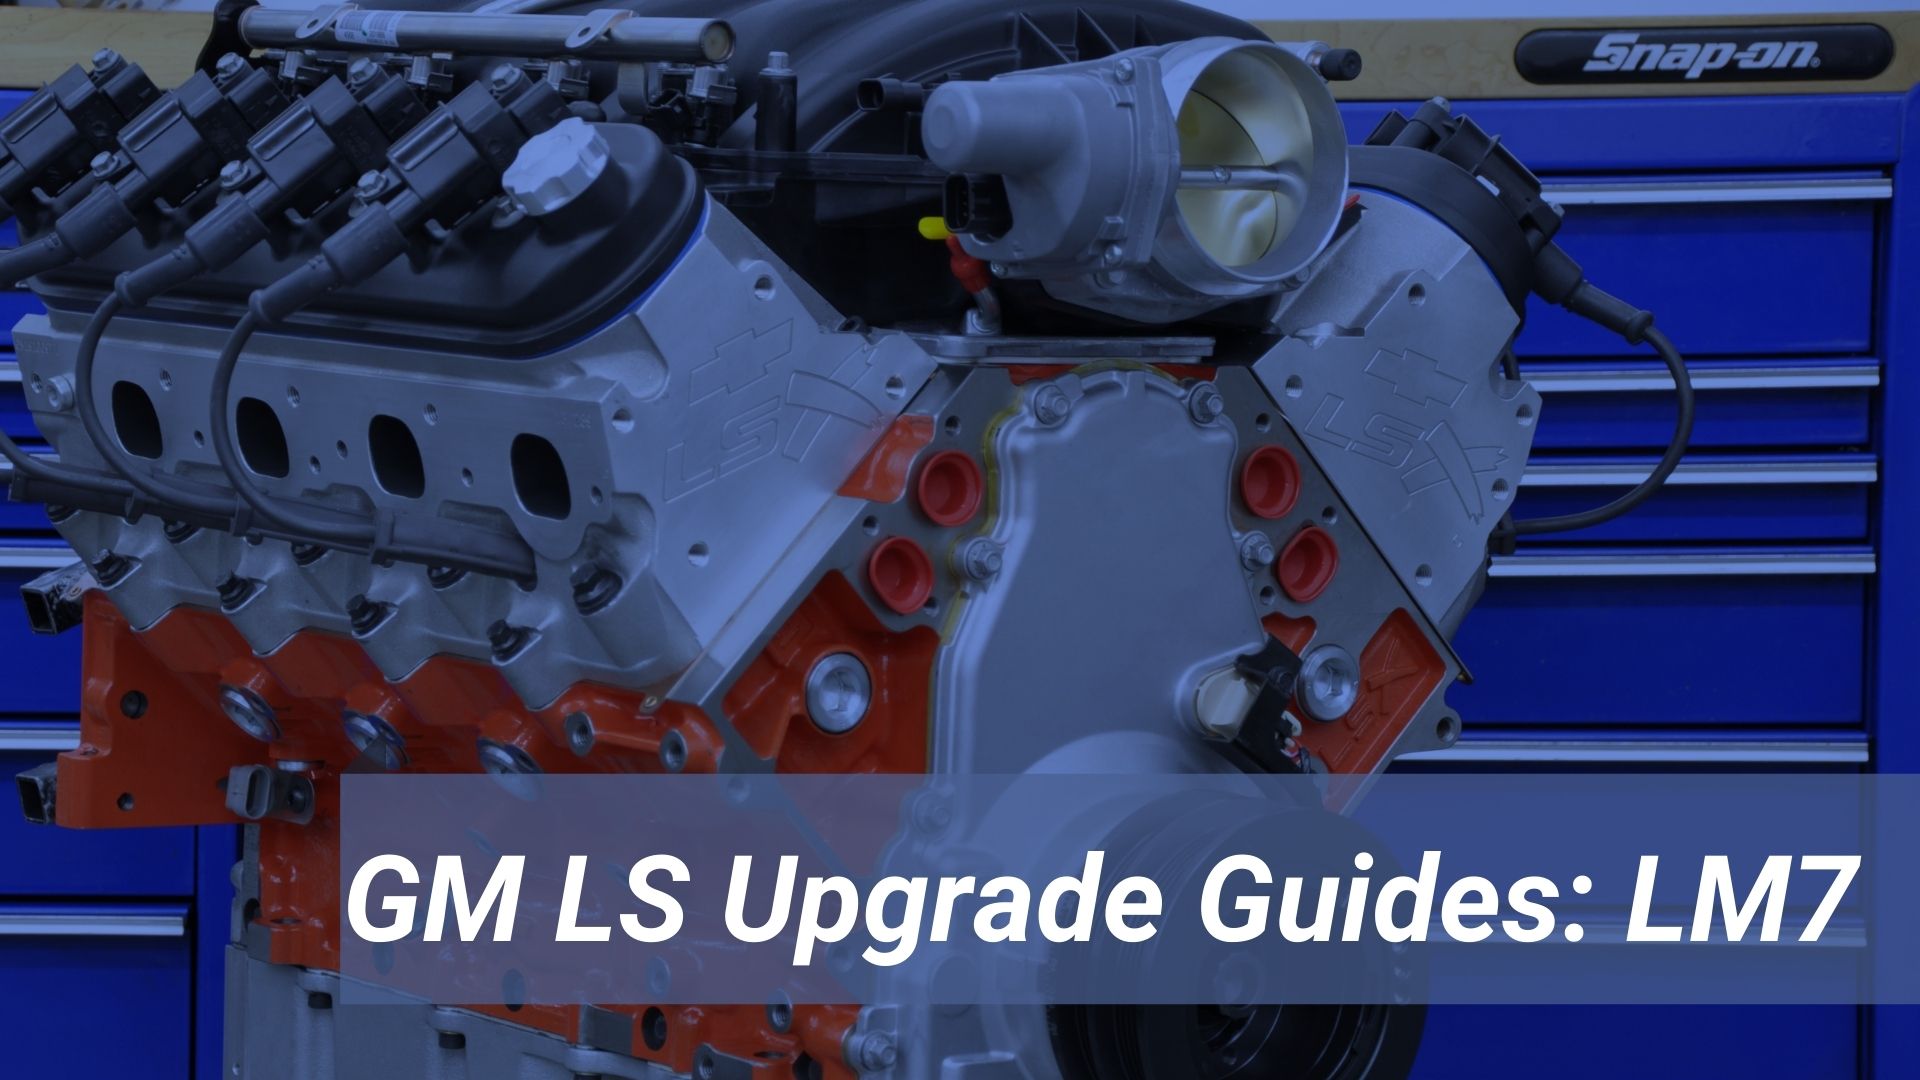 LM7 5.3L Engine Upgrade Guide: Expert Advice for LM7 Mods to Maximize Performance